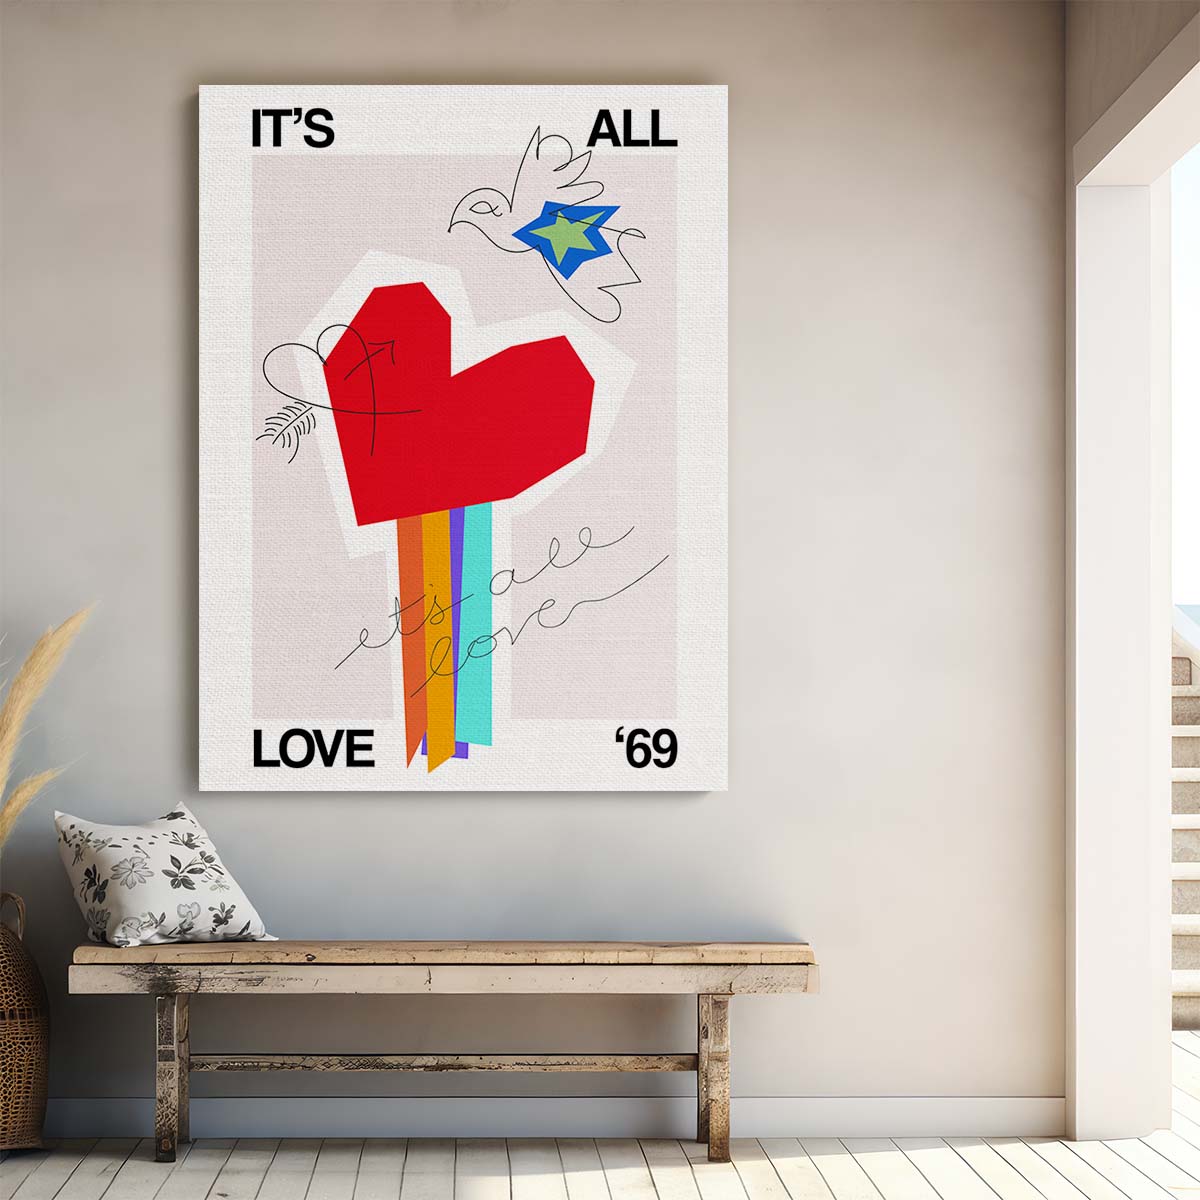 Inspirational '69 Love Heart Bird Illustration Wall Art by Luxuriance Designs, made in USA